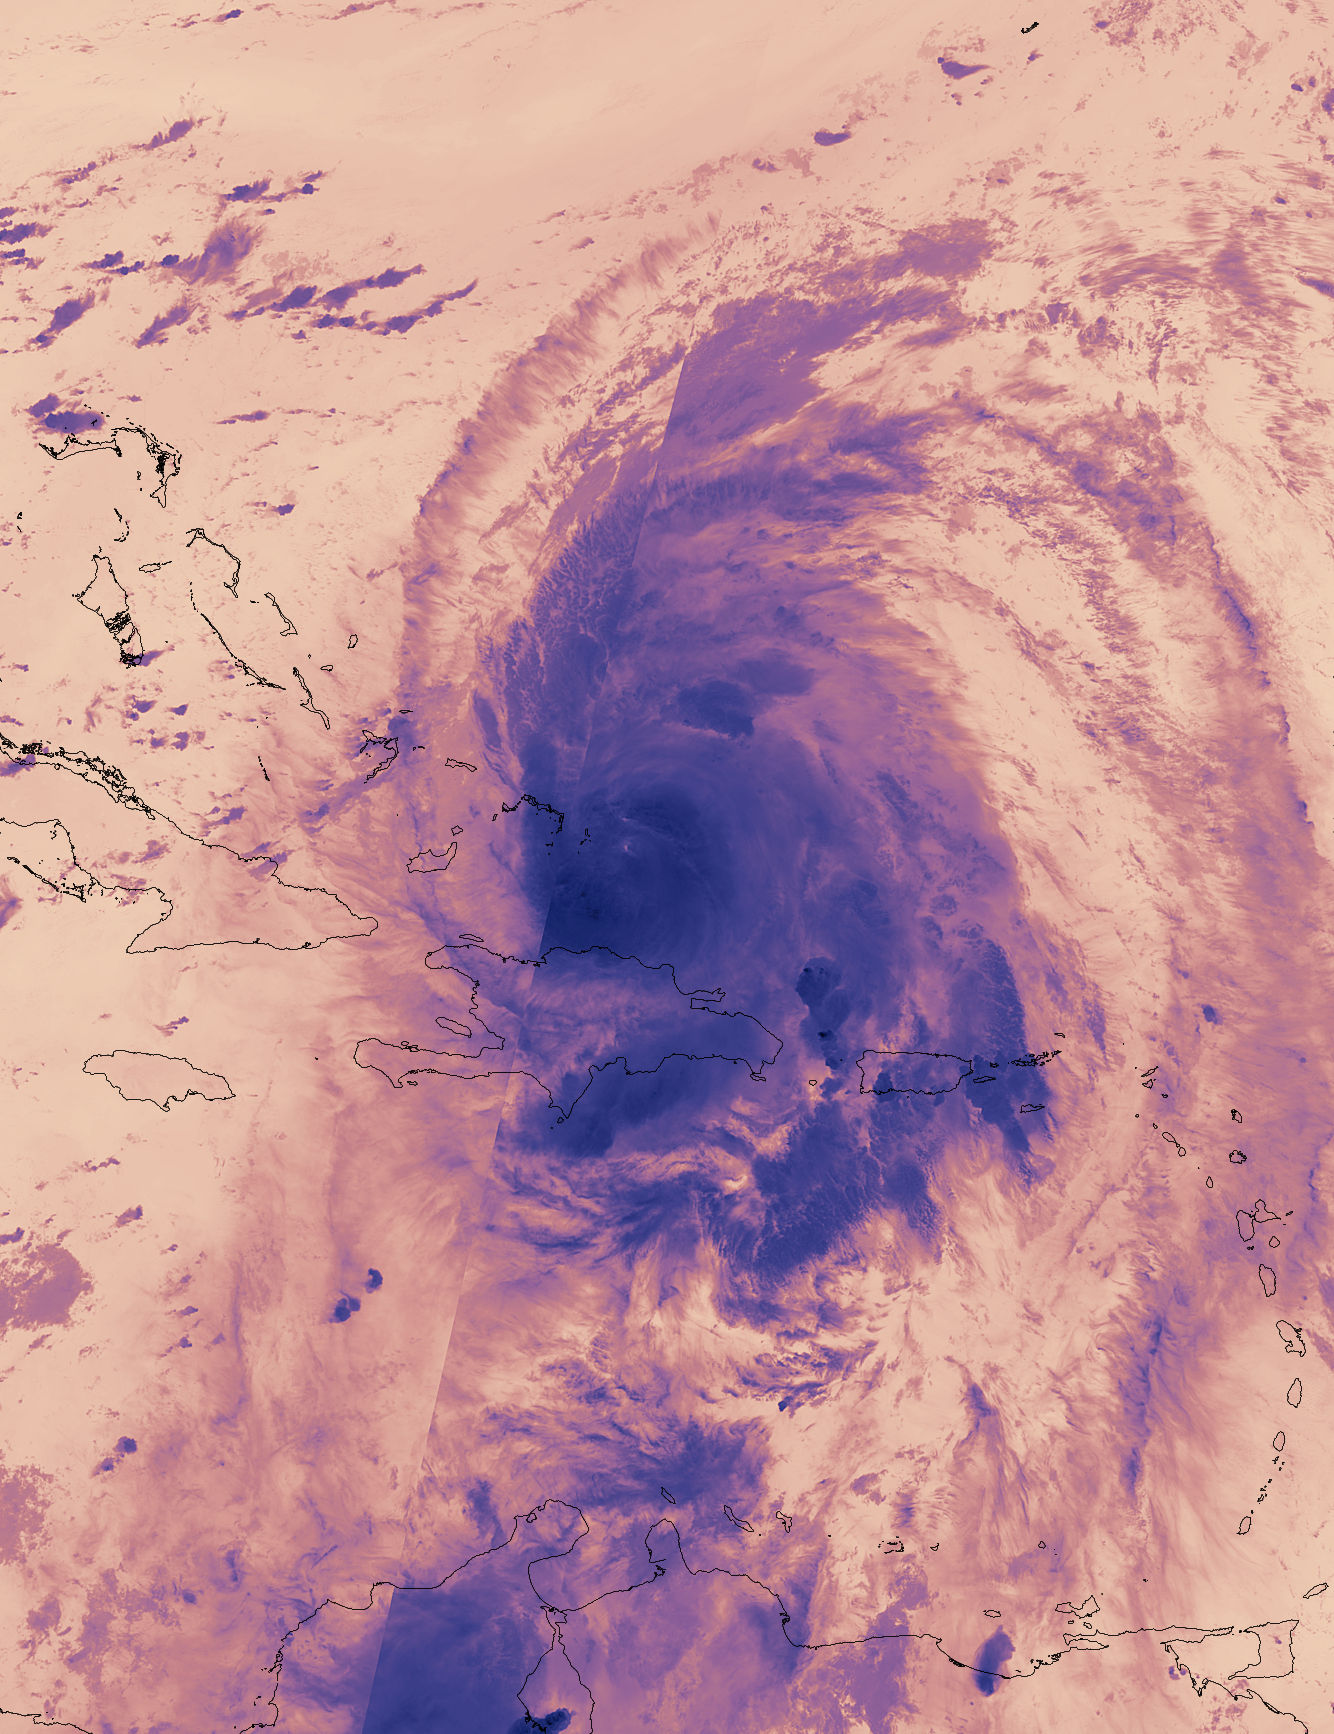 Suomi NPP image of Maria with the clouds in light purple.